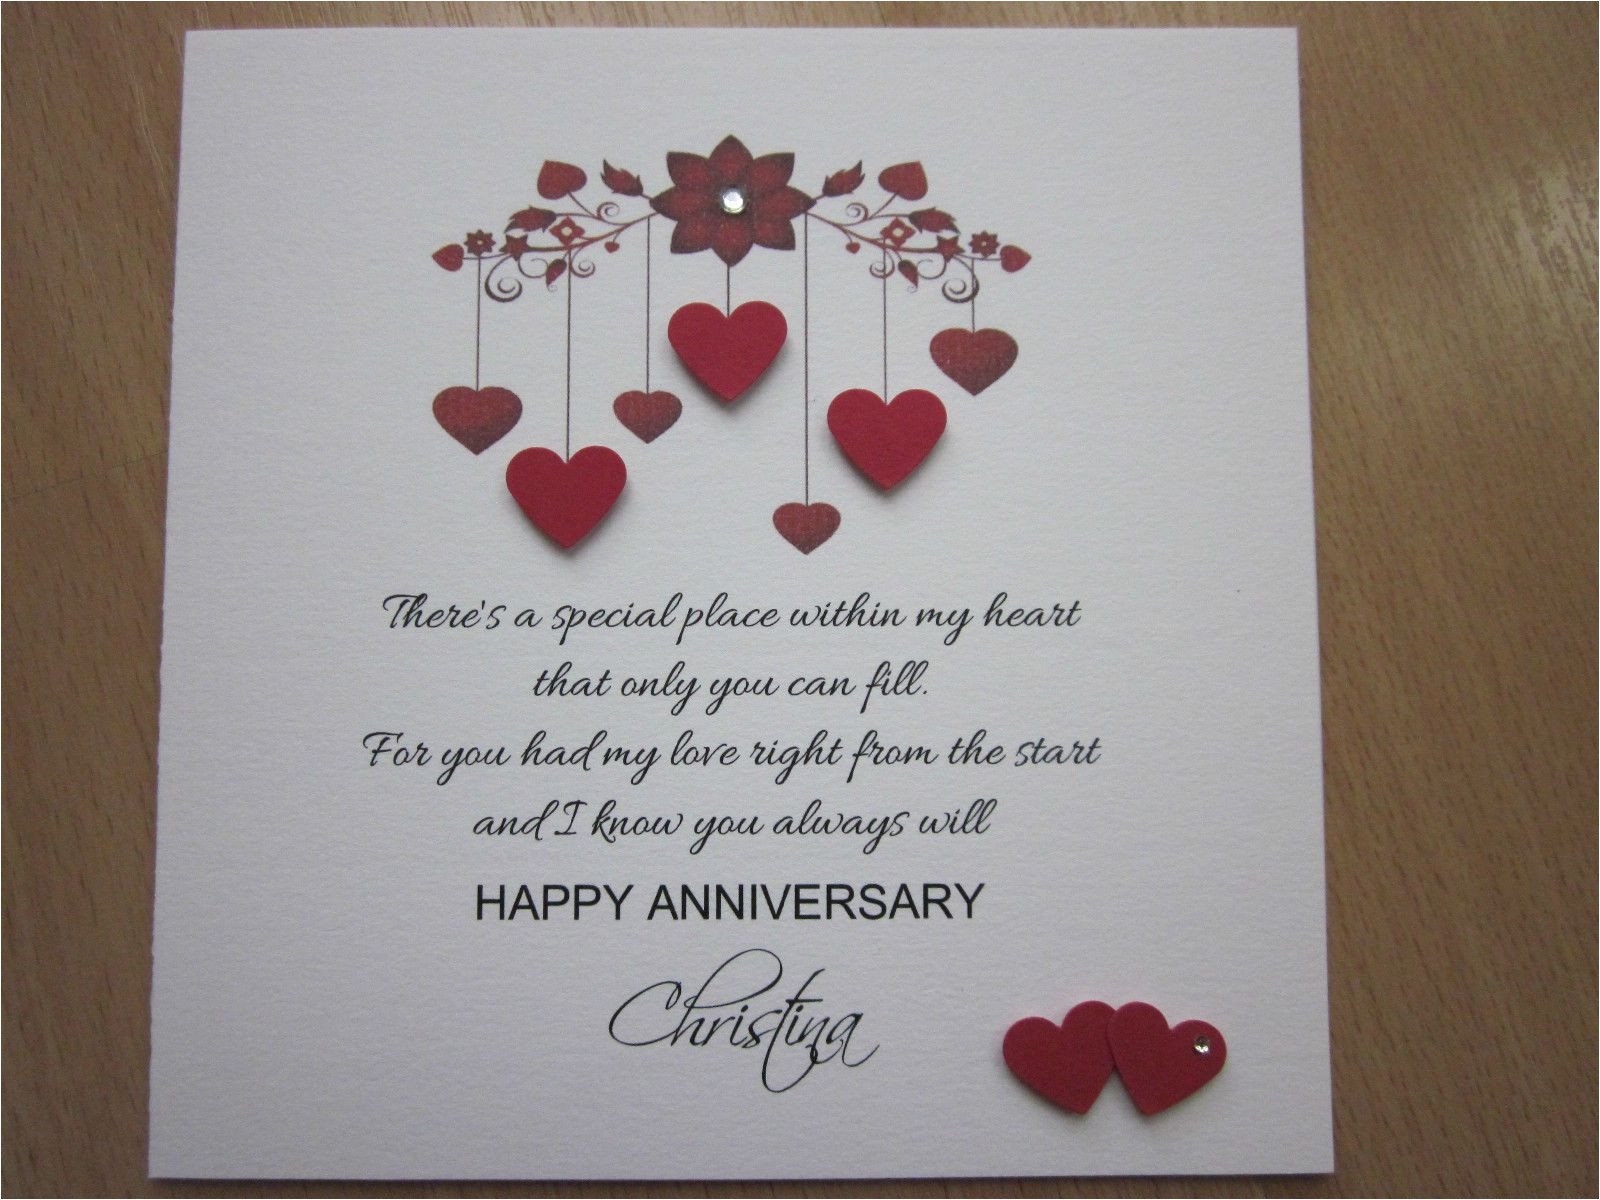 Greeting Card Quotes for Husband Details About Personalised Handmade Anniversary Engagement